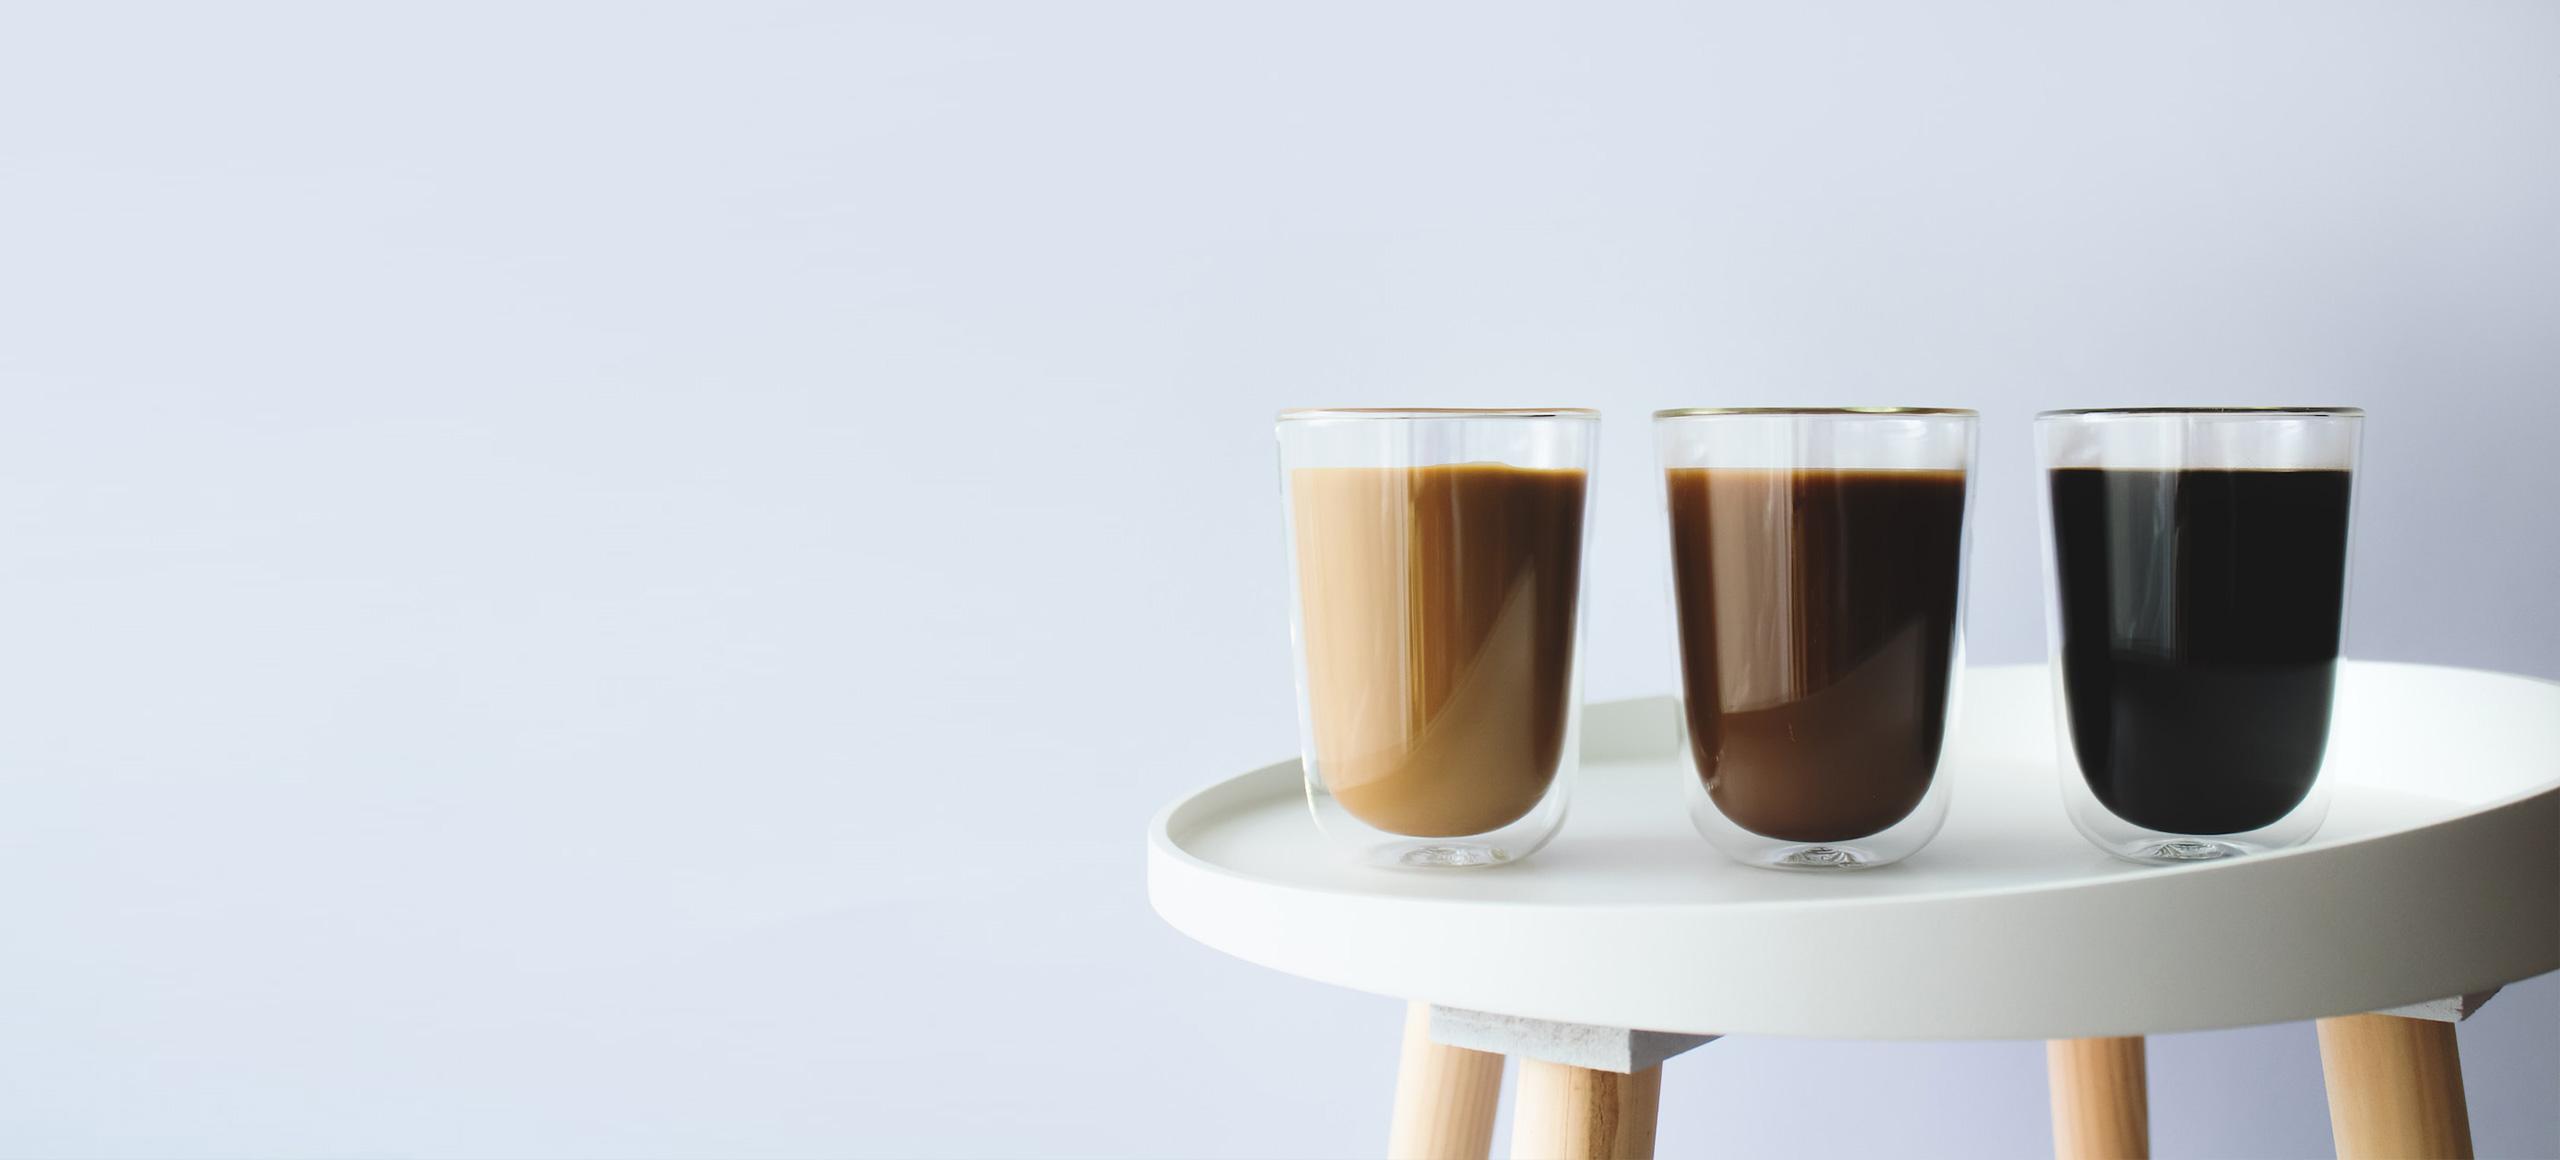 Coffee glasses on a table